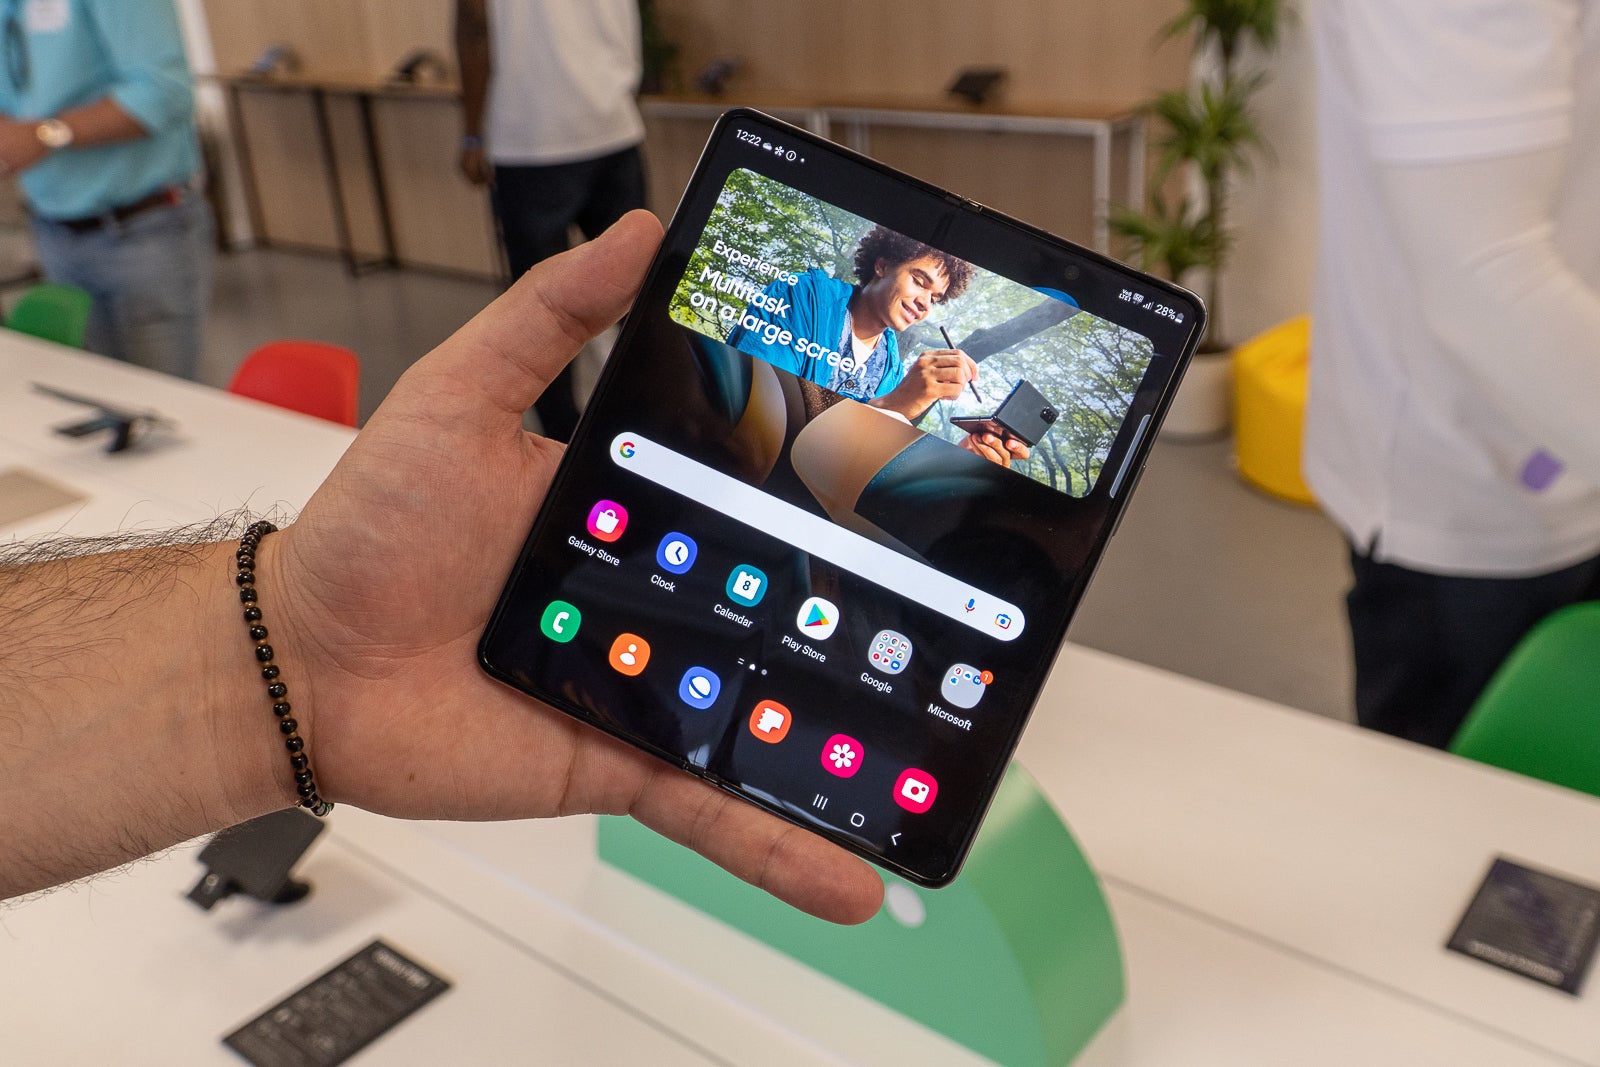 (Image Credit - PhoneArena) Galaxy Z Fold 4 unfolded - Samsung Galaxy Z Fold 4 vs iPhone 13 Pro Max: hands-on first impressions